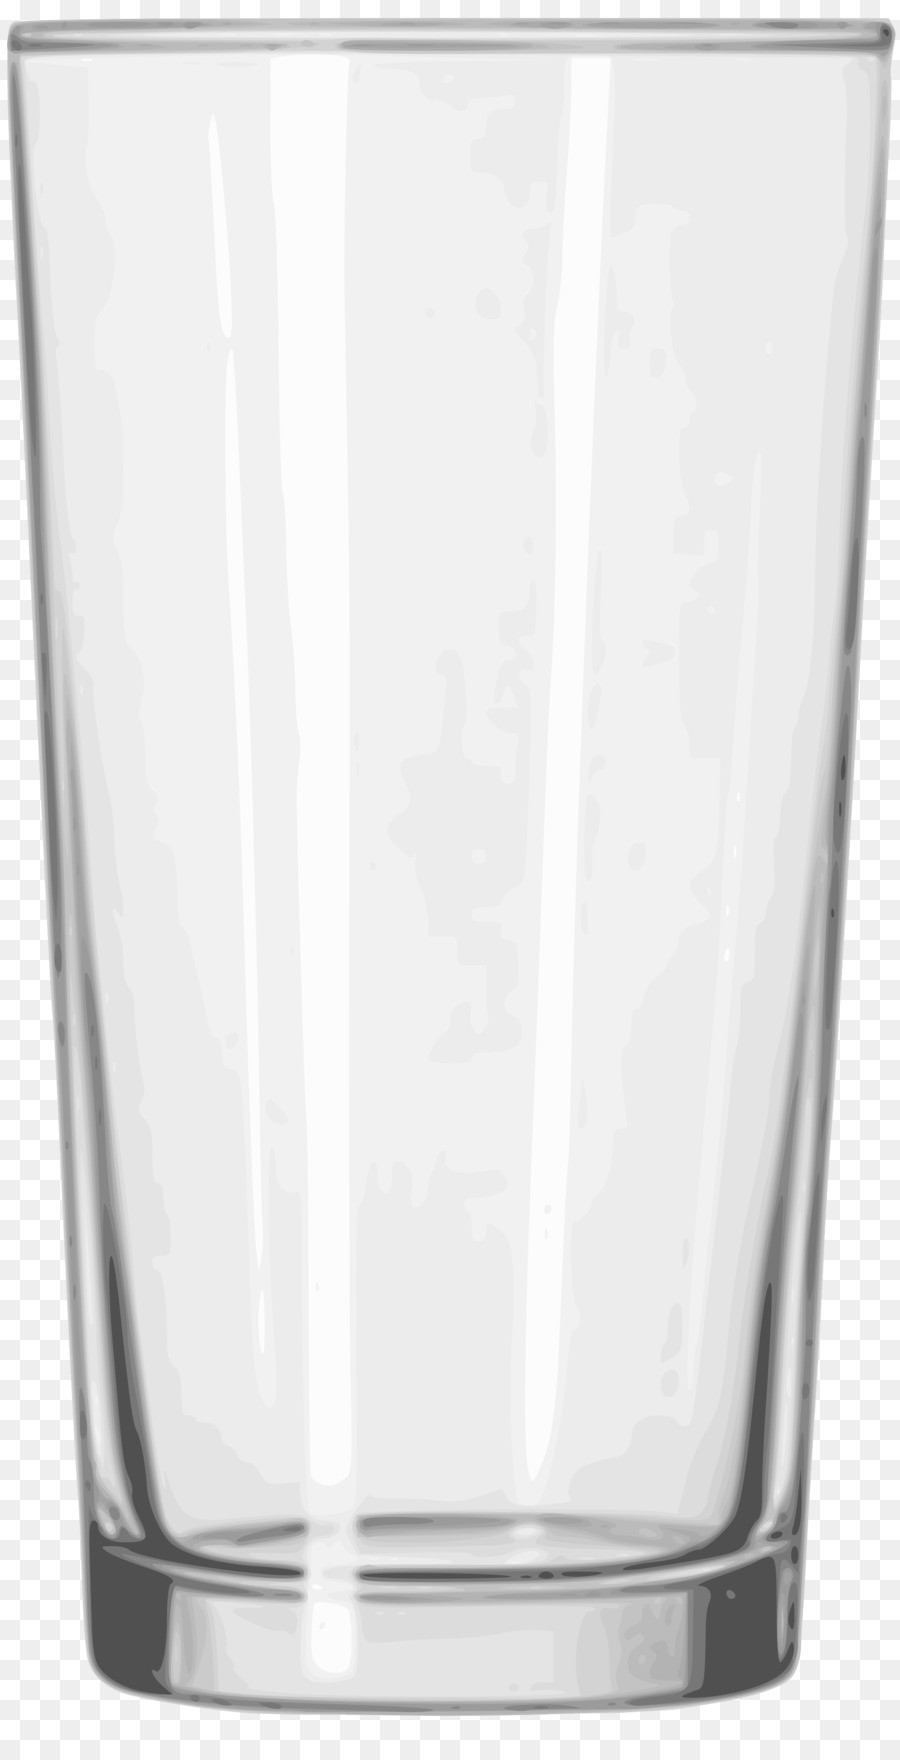 Iced tea Glass Cup Tumbler - Drinking Glass PNG Image png download